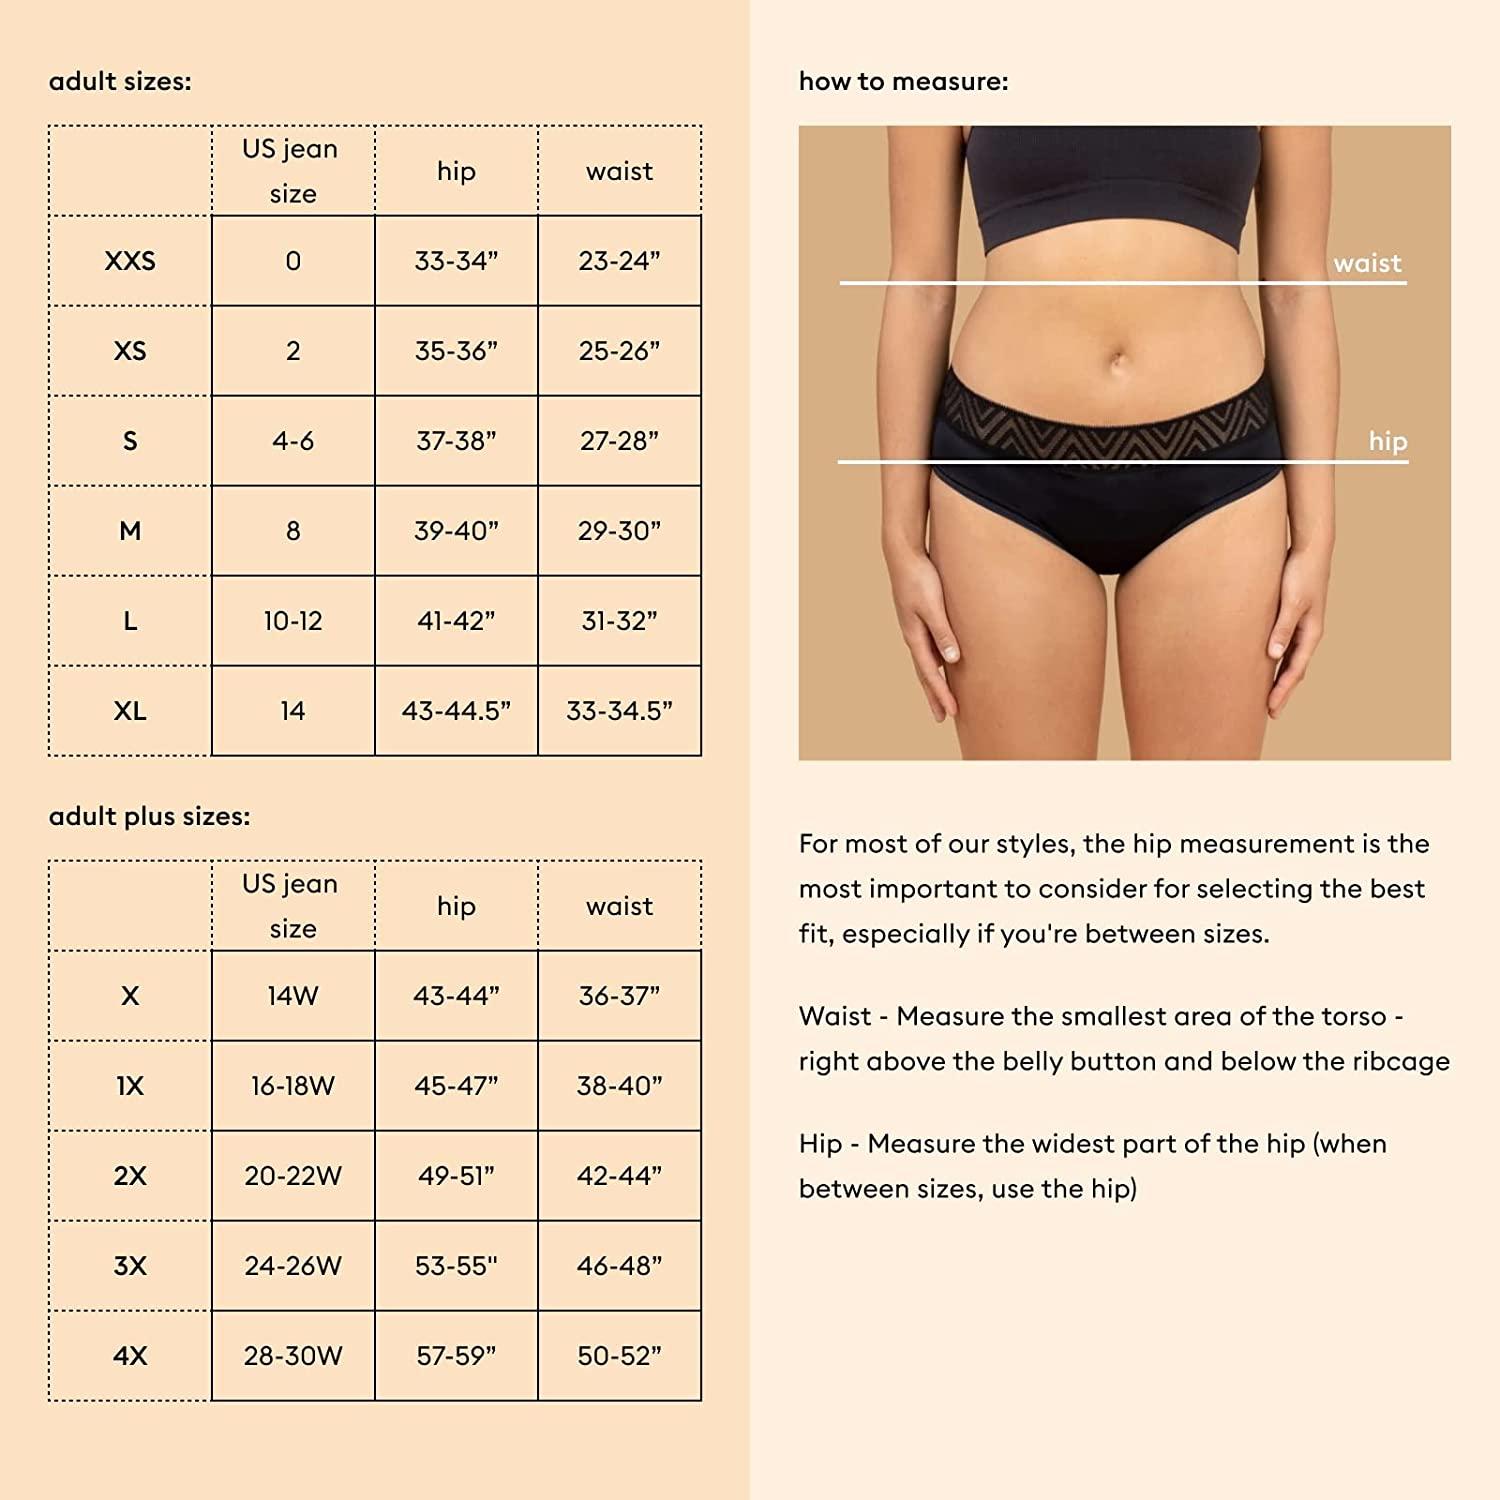 Thinx for All Women's Moderate Absorbency Period Underwear Black